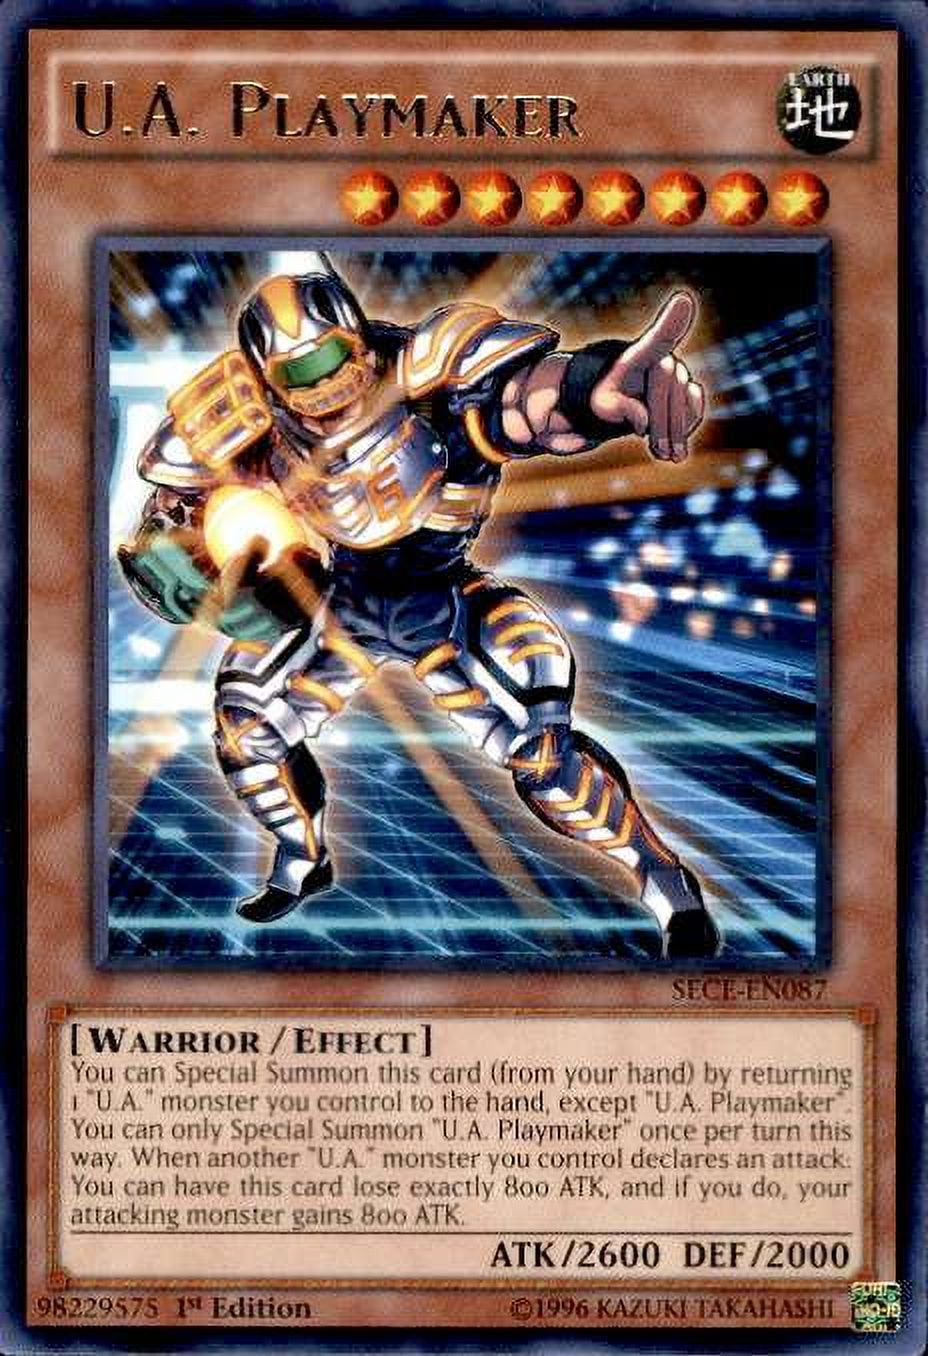  Yu-Gi-Oh! - Thunder Crash (IOC-043) - Invasion of Chaos -  Unlimited Edition - Common : Toys & Games